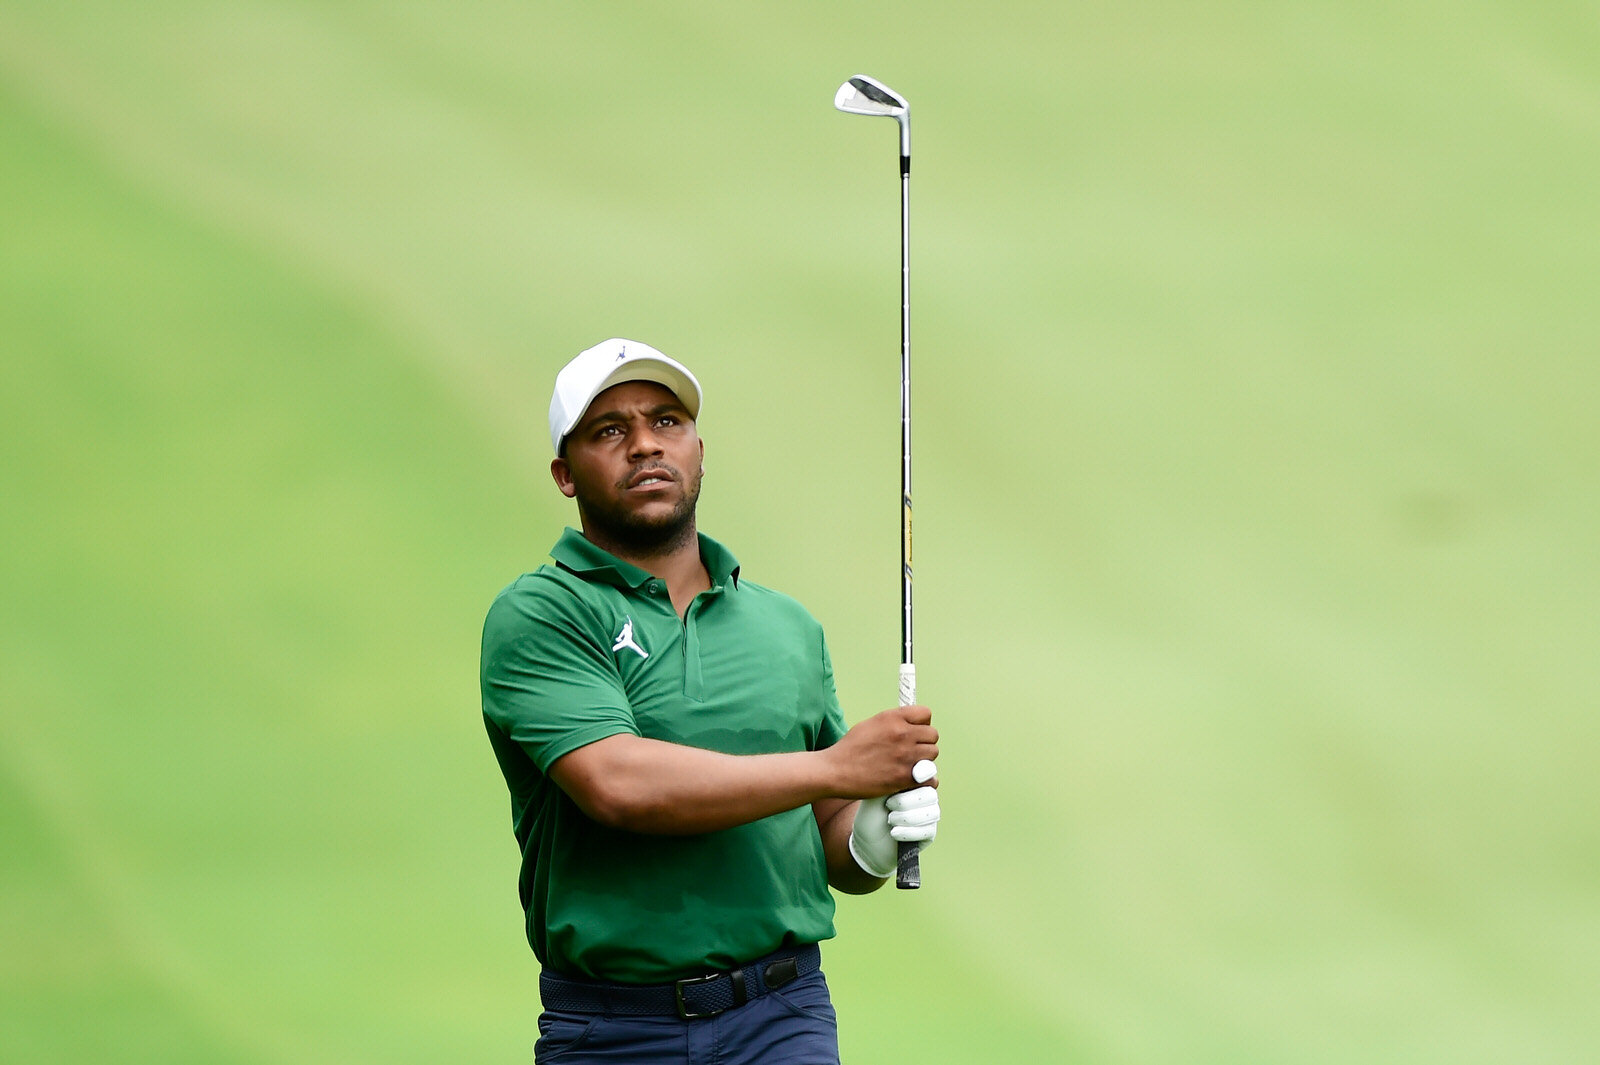  GREENSBORO, NORTH CAROLINA - AUGUST 14: Harold Varner III of the United States plays a shot on the 11th hole during the second round of the Wyndham Championship at  Sedgefield Country Club on August 14, 2020 in Greensboro, North Carolina. (Photo by 